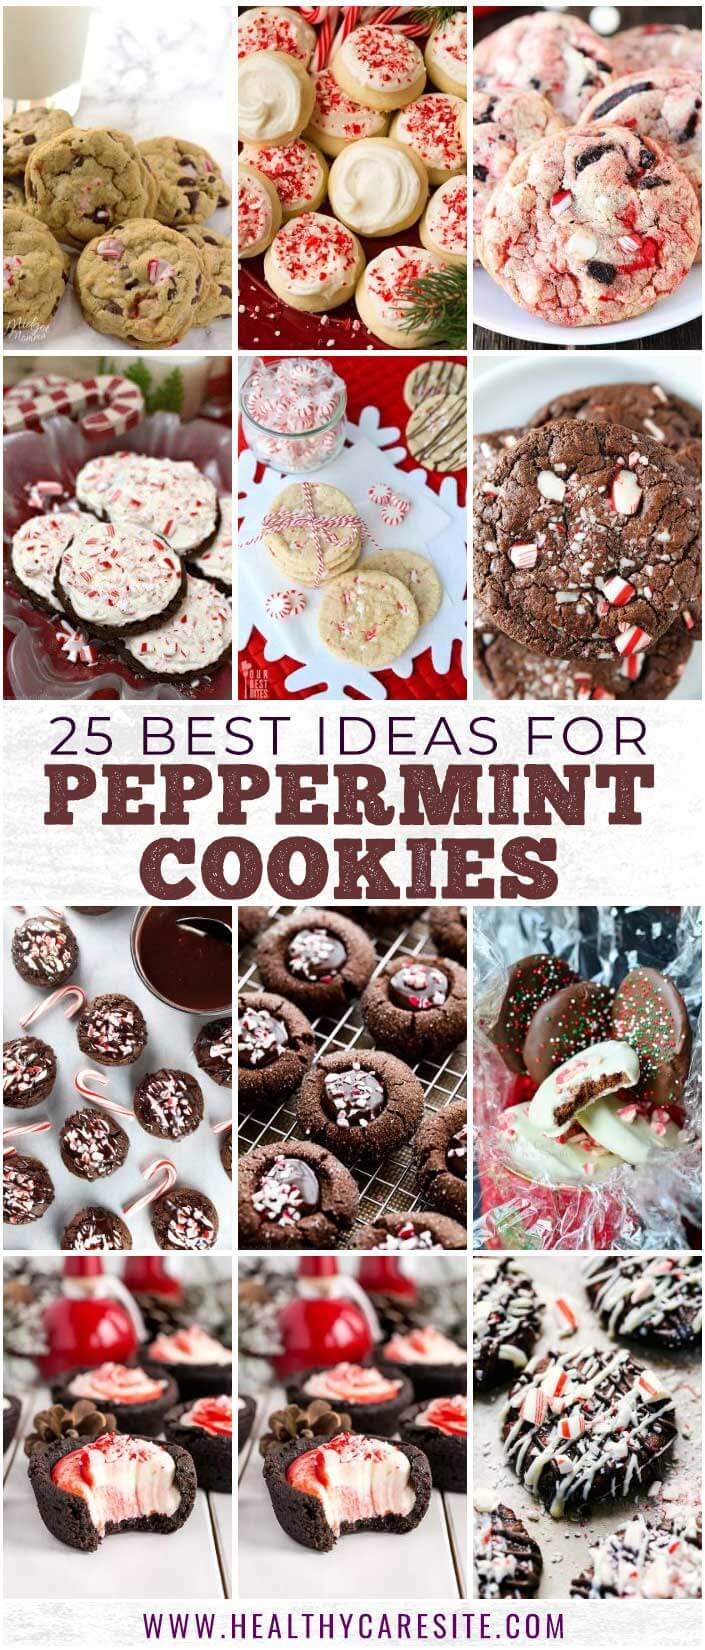 25 Best Ideas For Peppermint Cookies